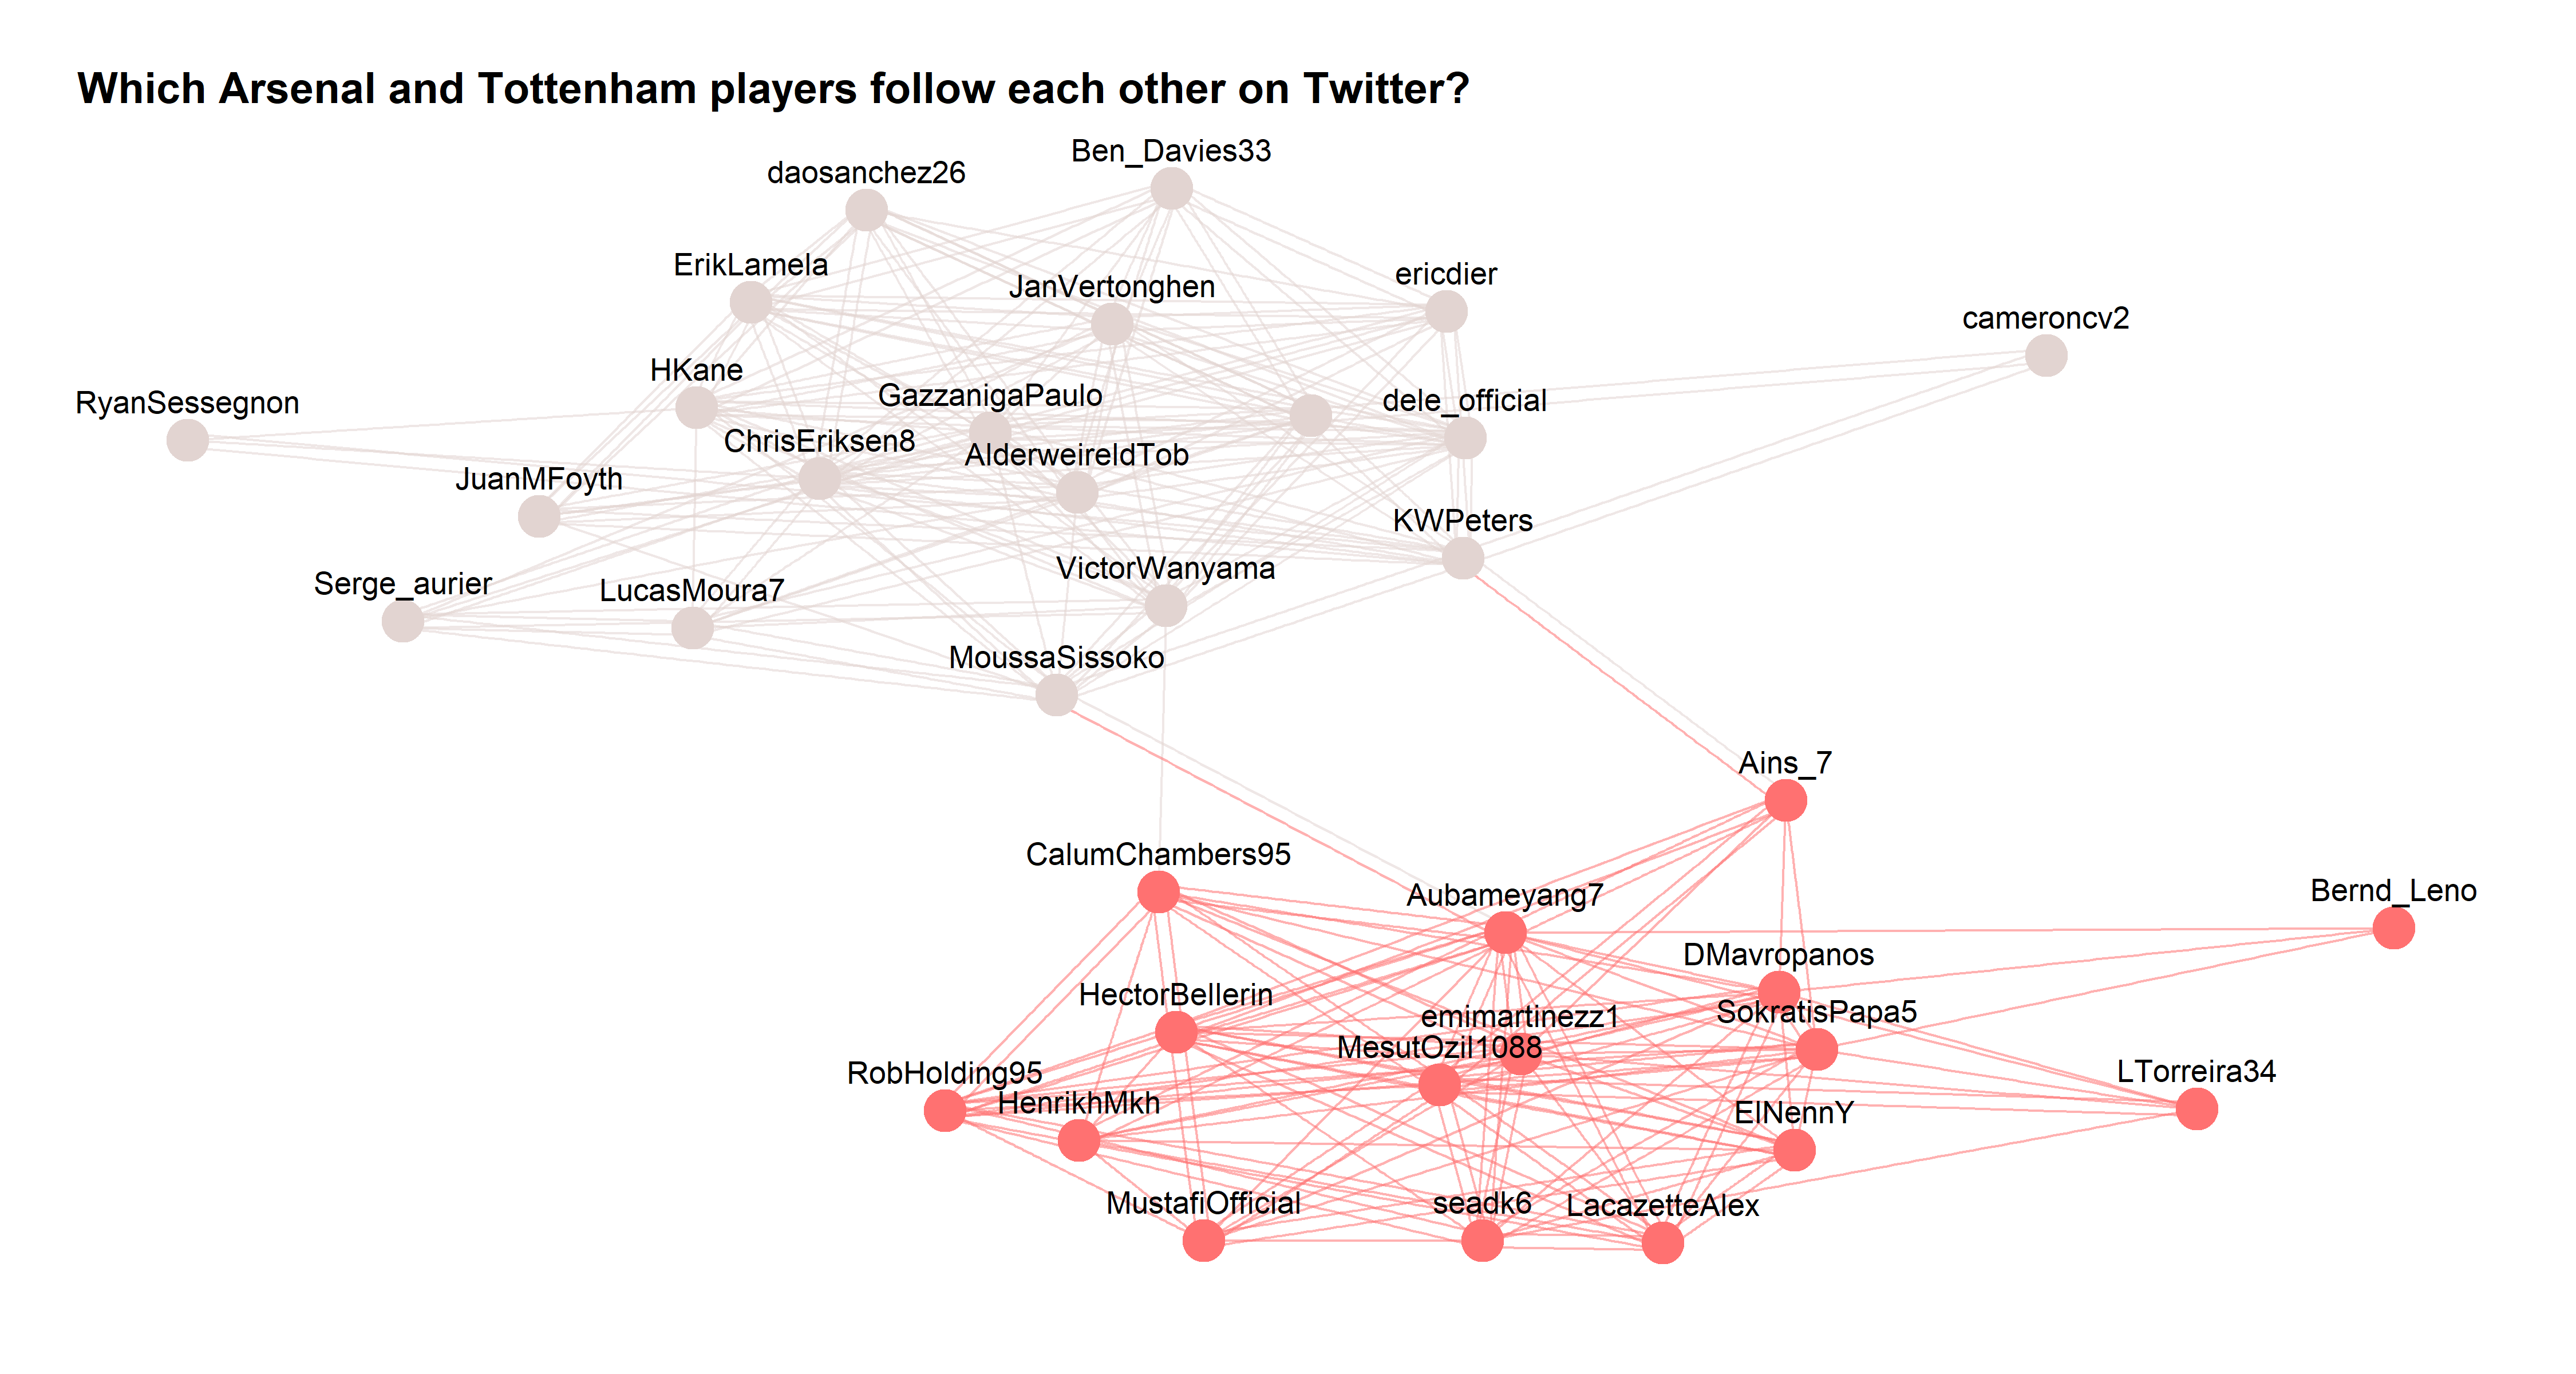 Which Arsenal and Tottenham Hotspur players follow each other on Twitter?